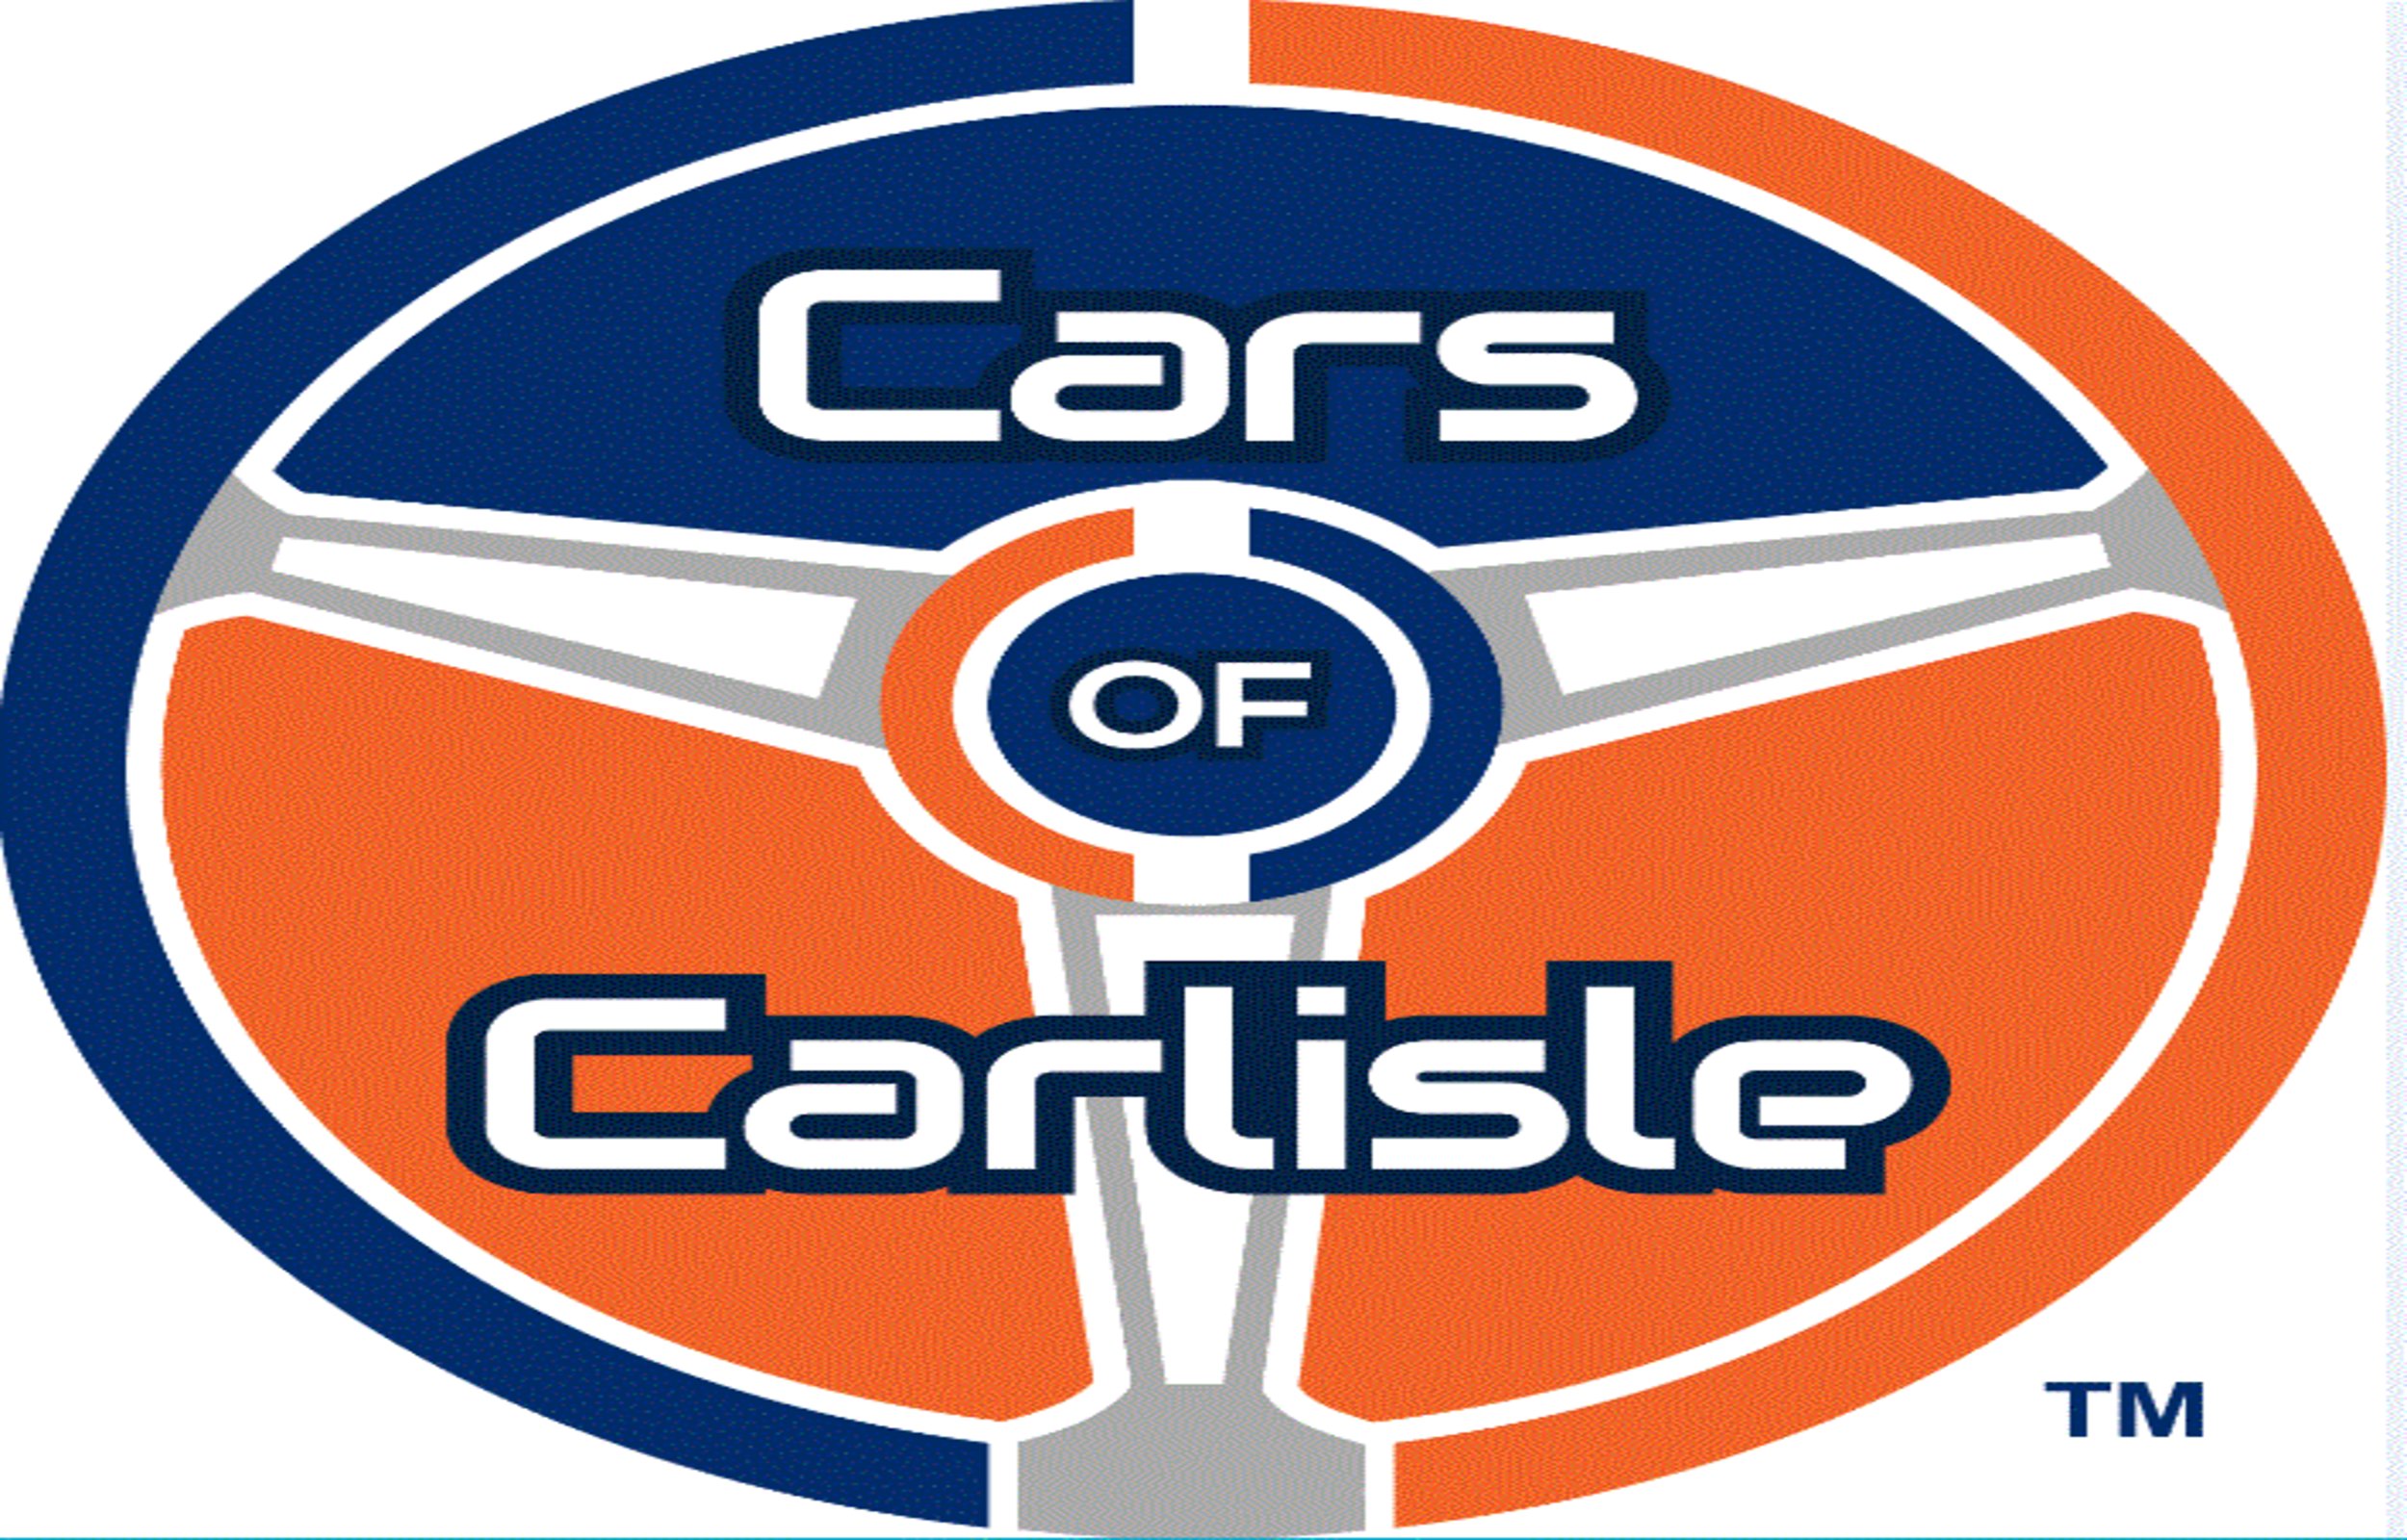 Cars of Carlisle  (C/of/C):   Episode 018  -- Bill Anderson Interview